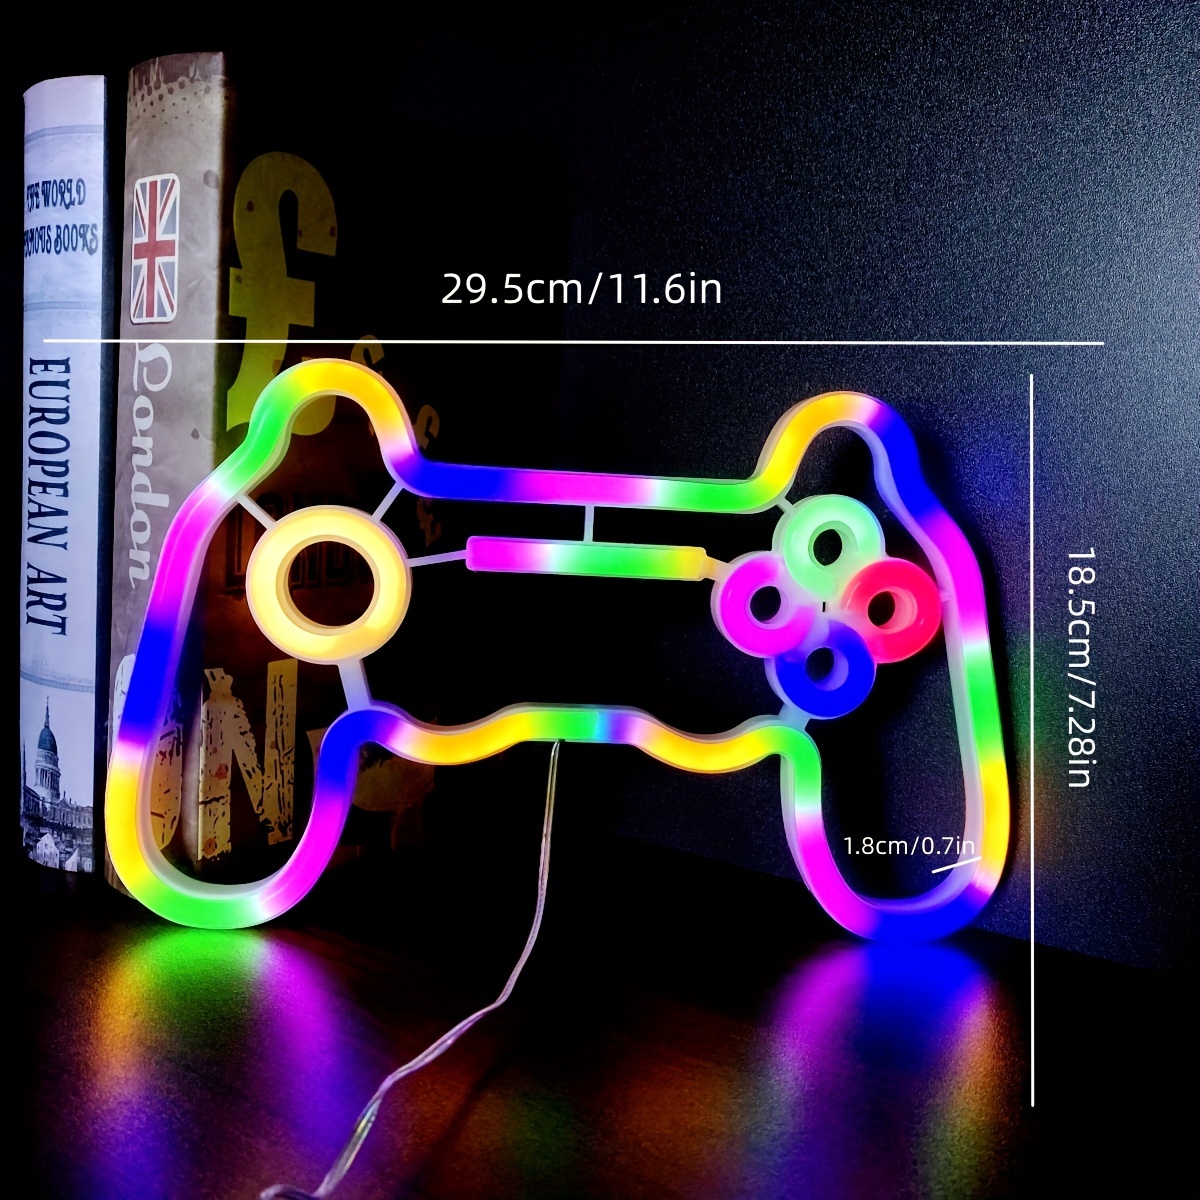 Ps4 Game Icon Lamp Neon Sign  Lamp Playstation Icons Light - Usb